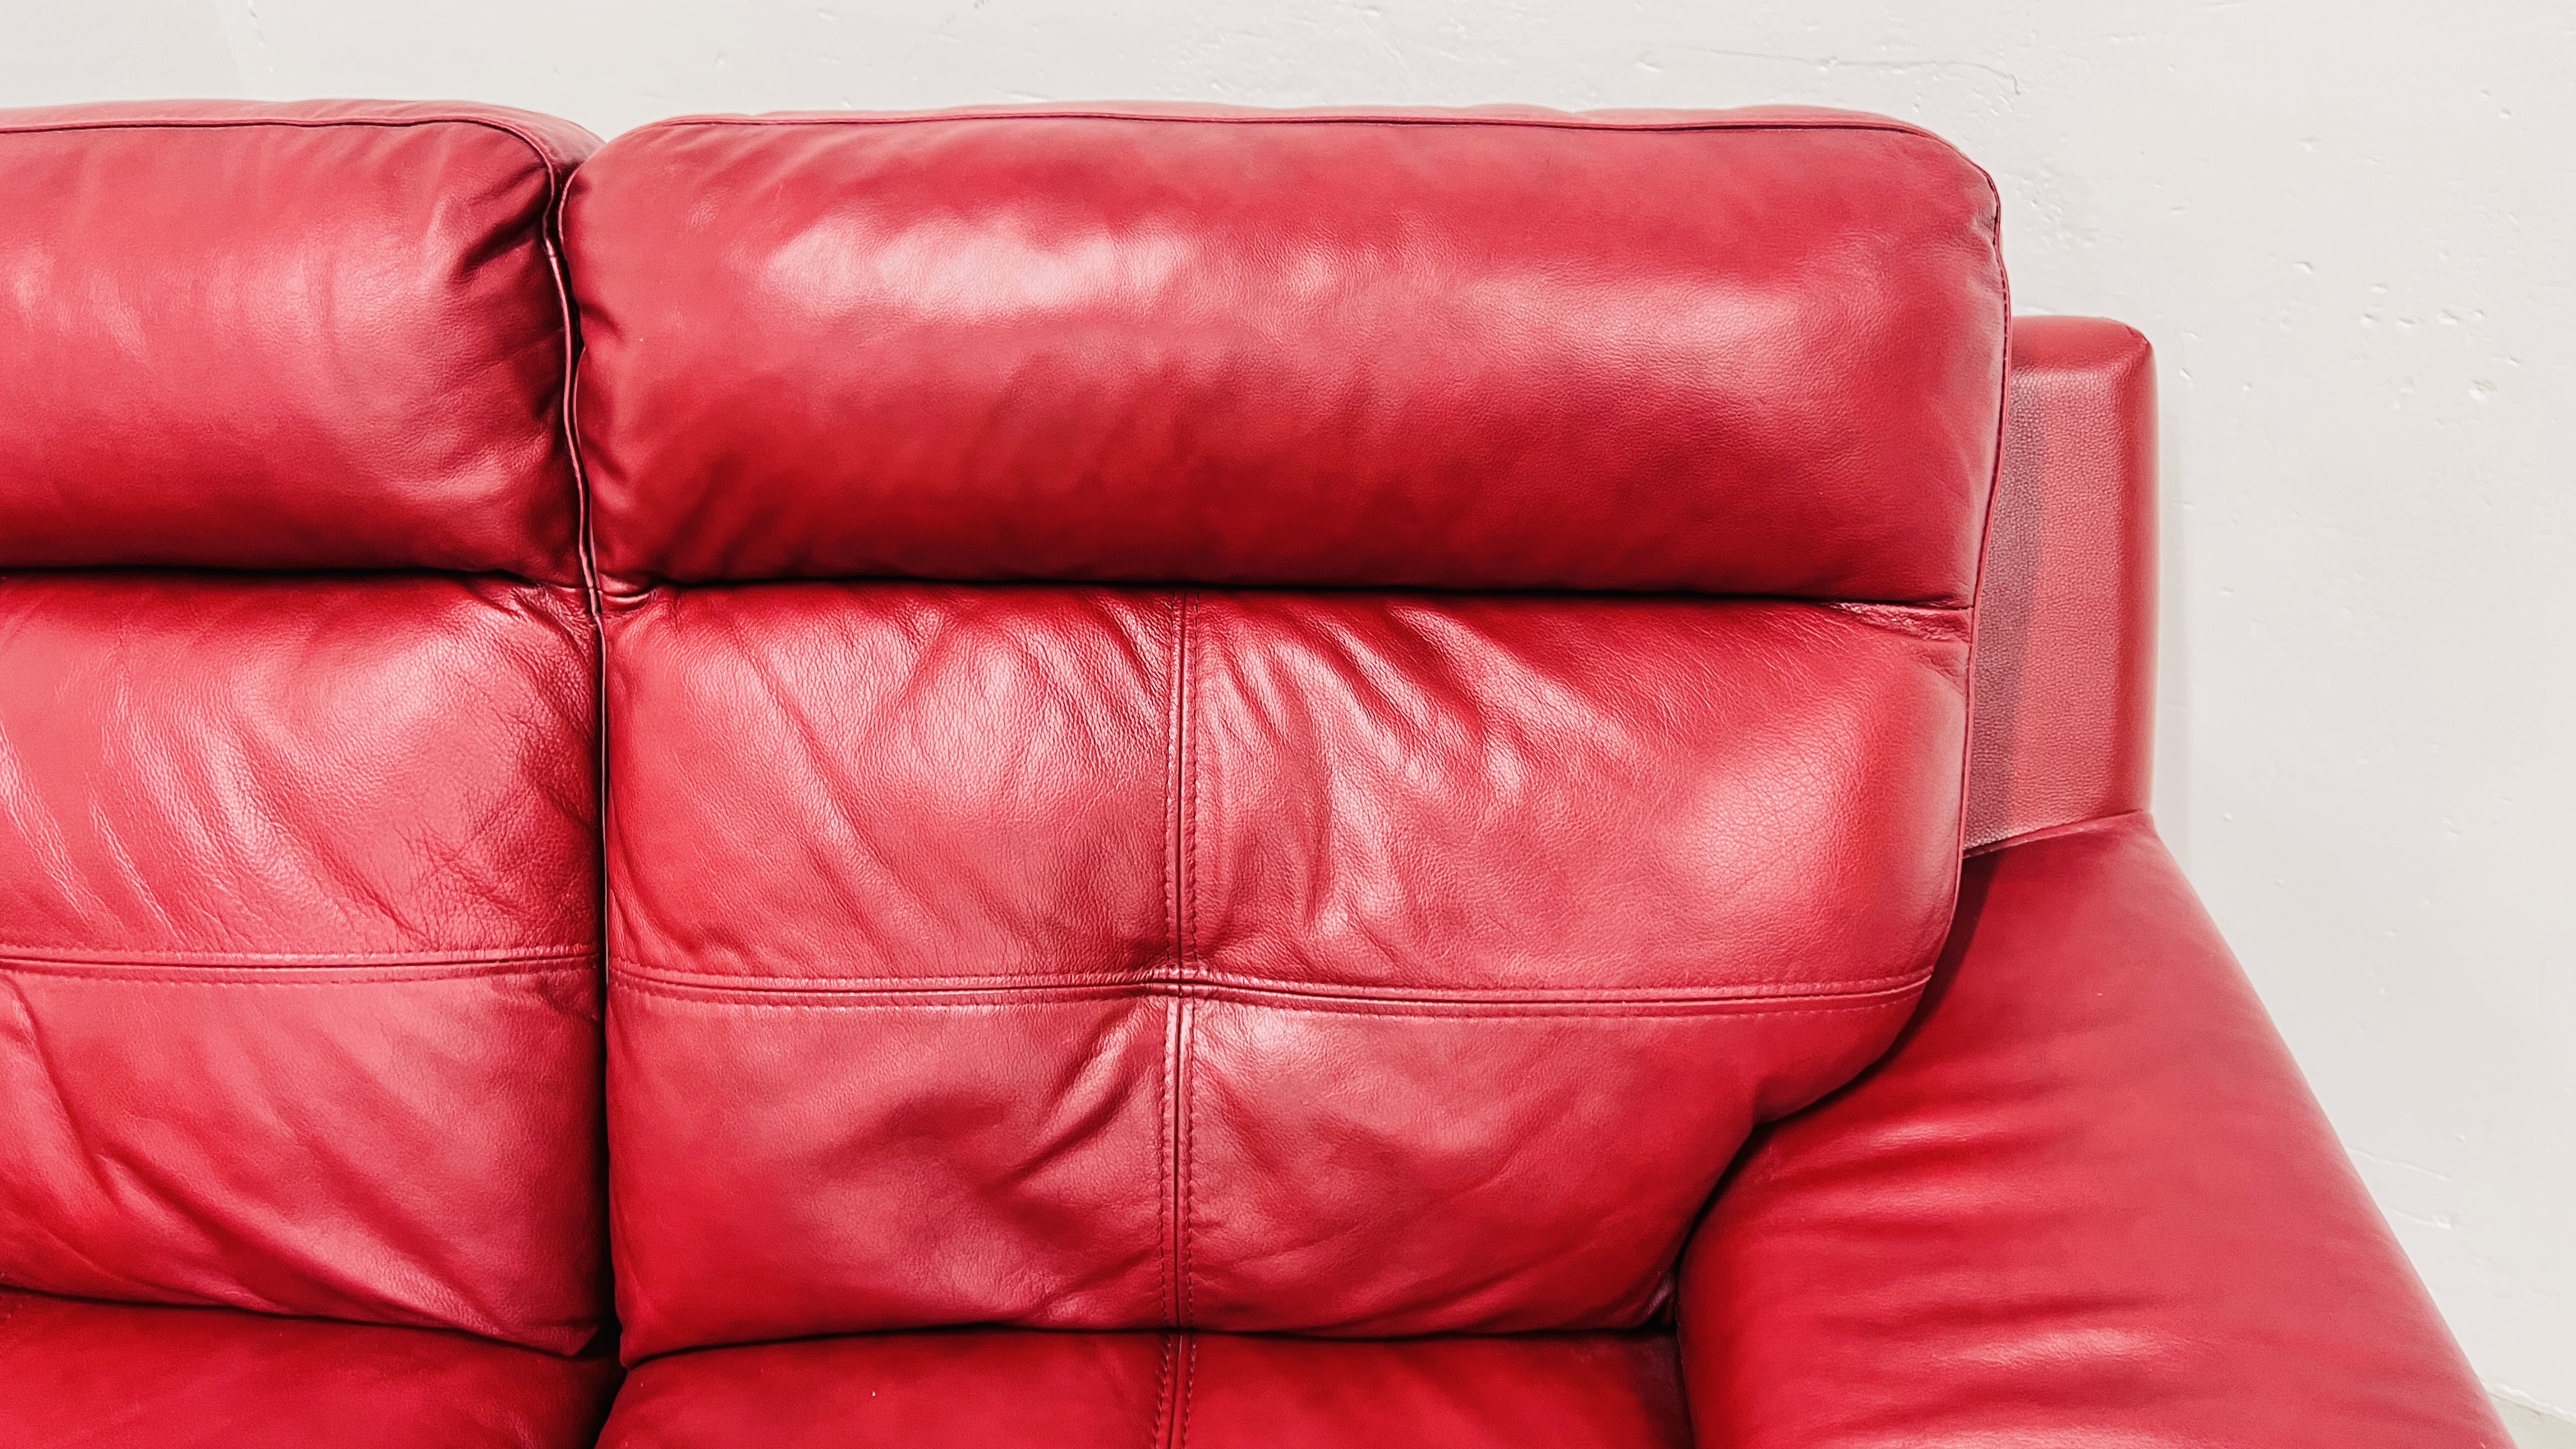 A DESIGNER ITALIAN RED LEATHER TWO SEATER SOFA W 180CM. - Image 5 of 10